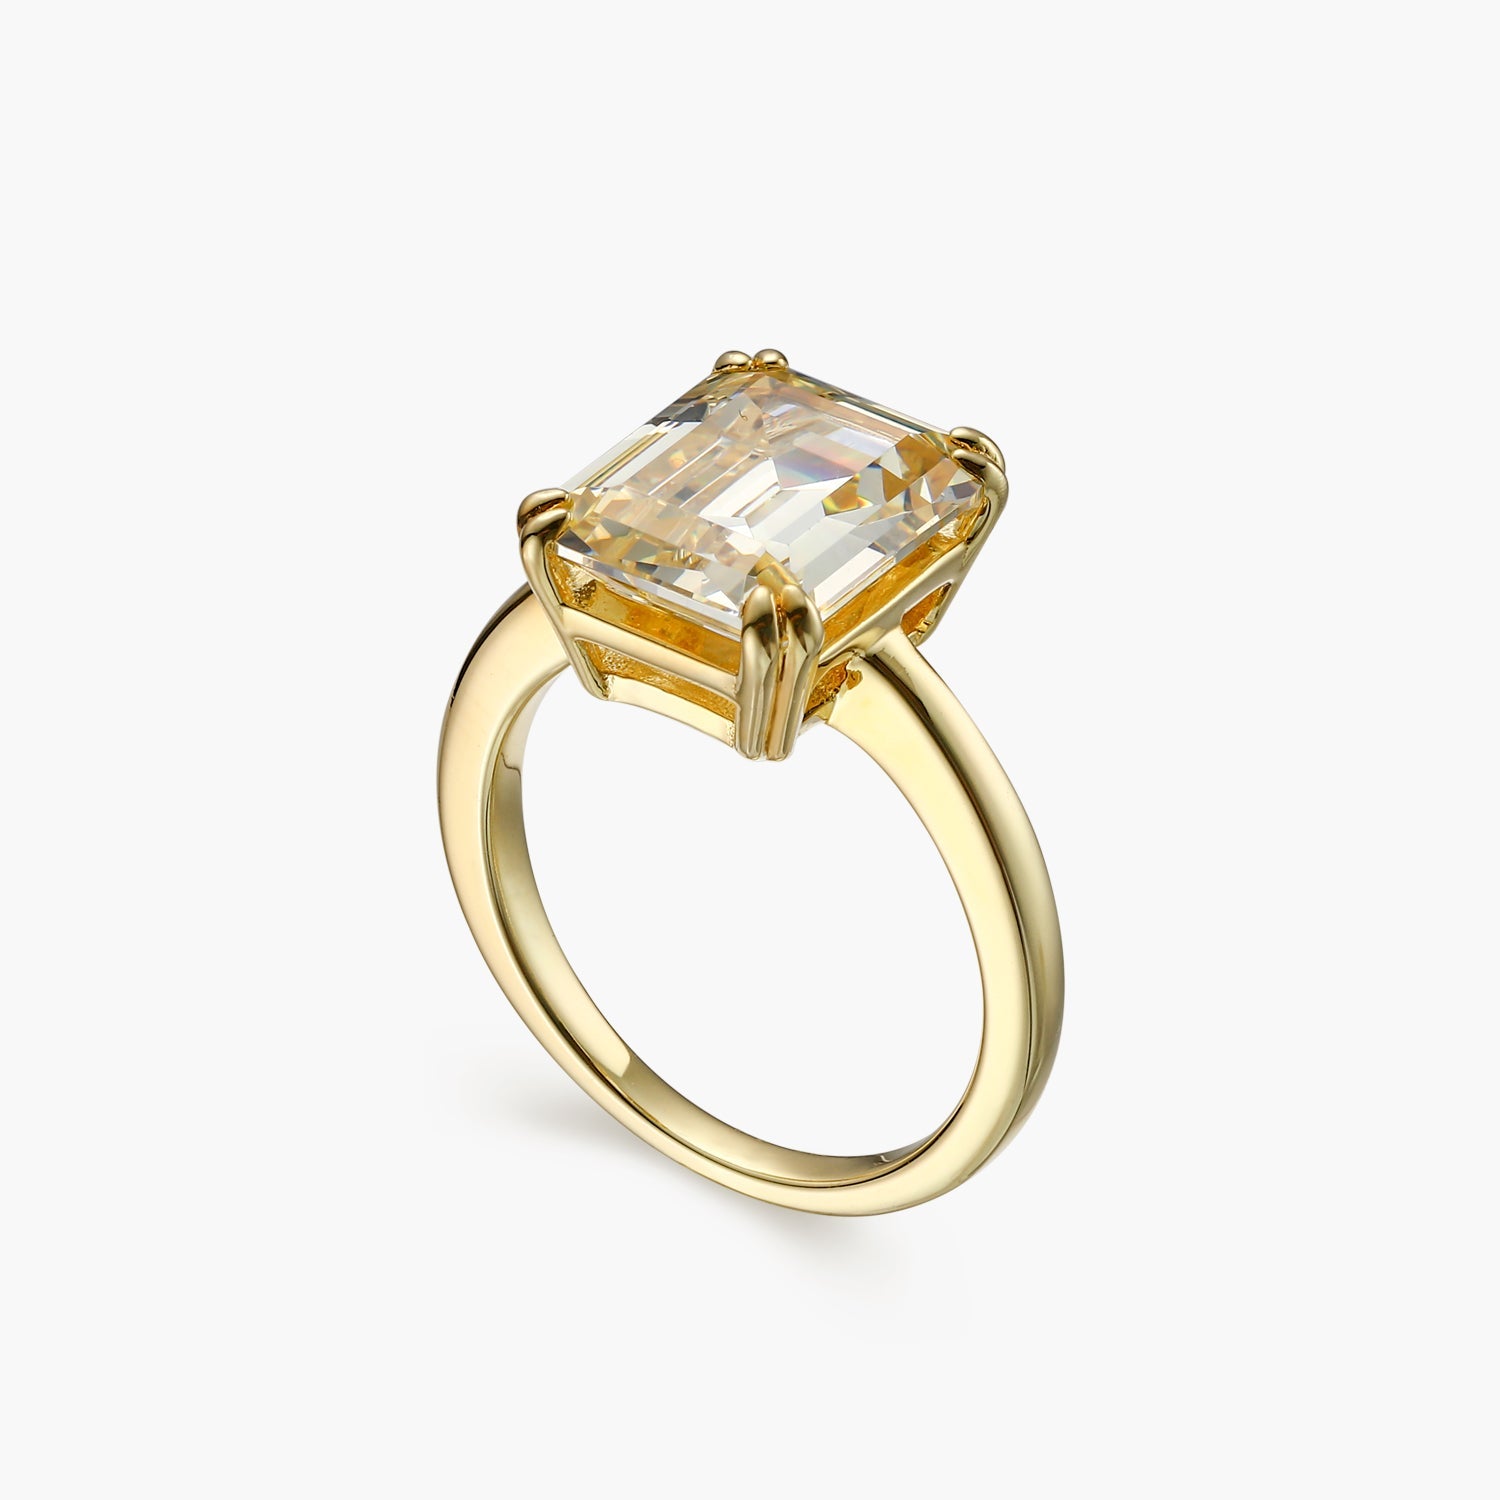 Citrine Yellow Emerald Cut Sterling Silver Ring - dissoojewelry